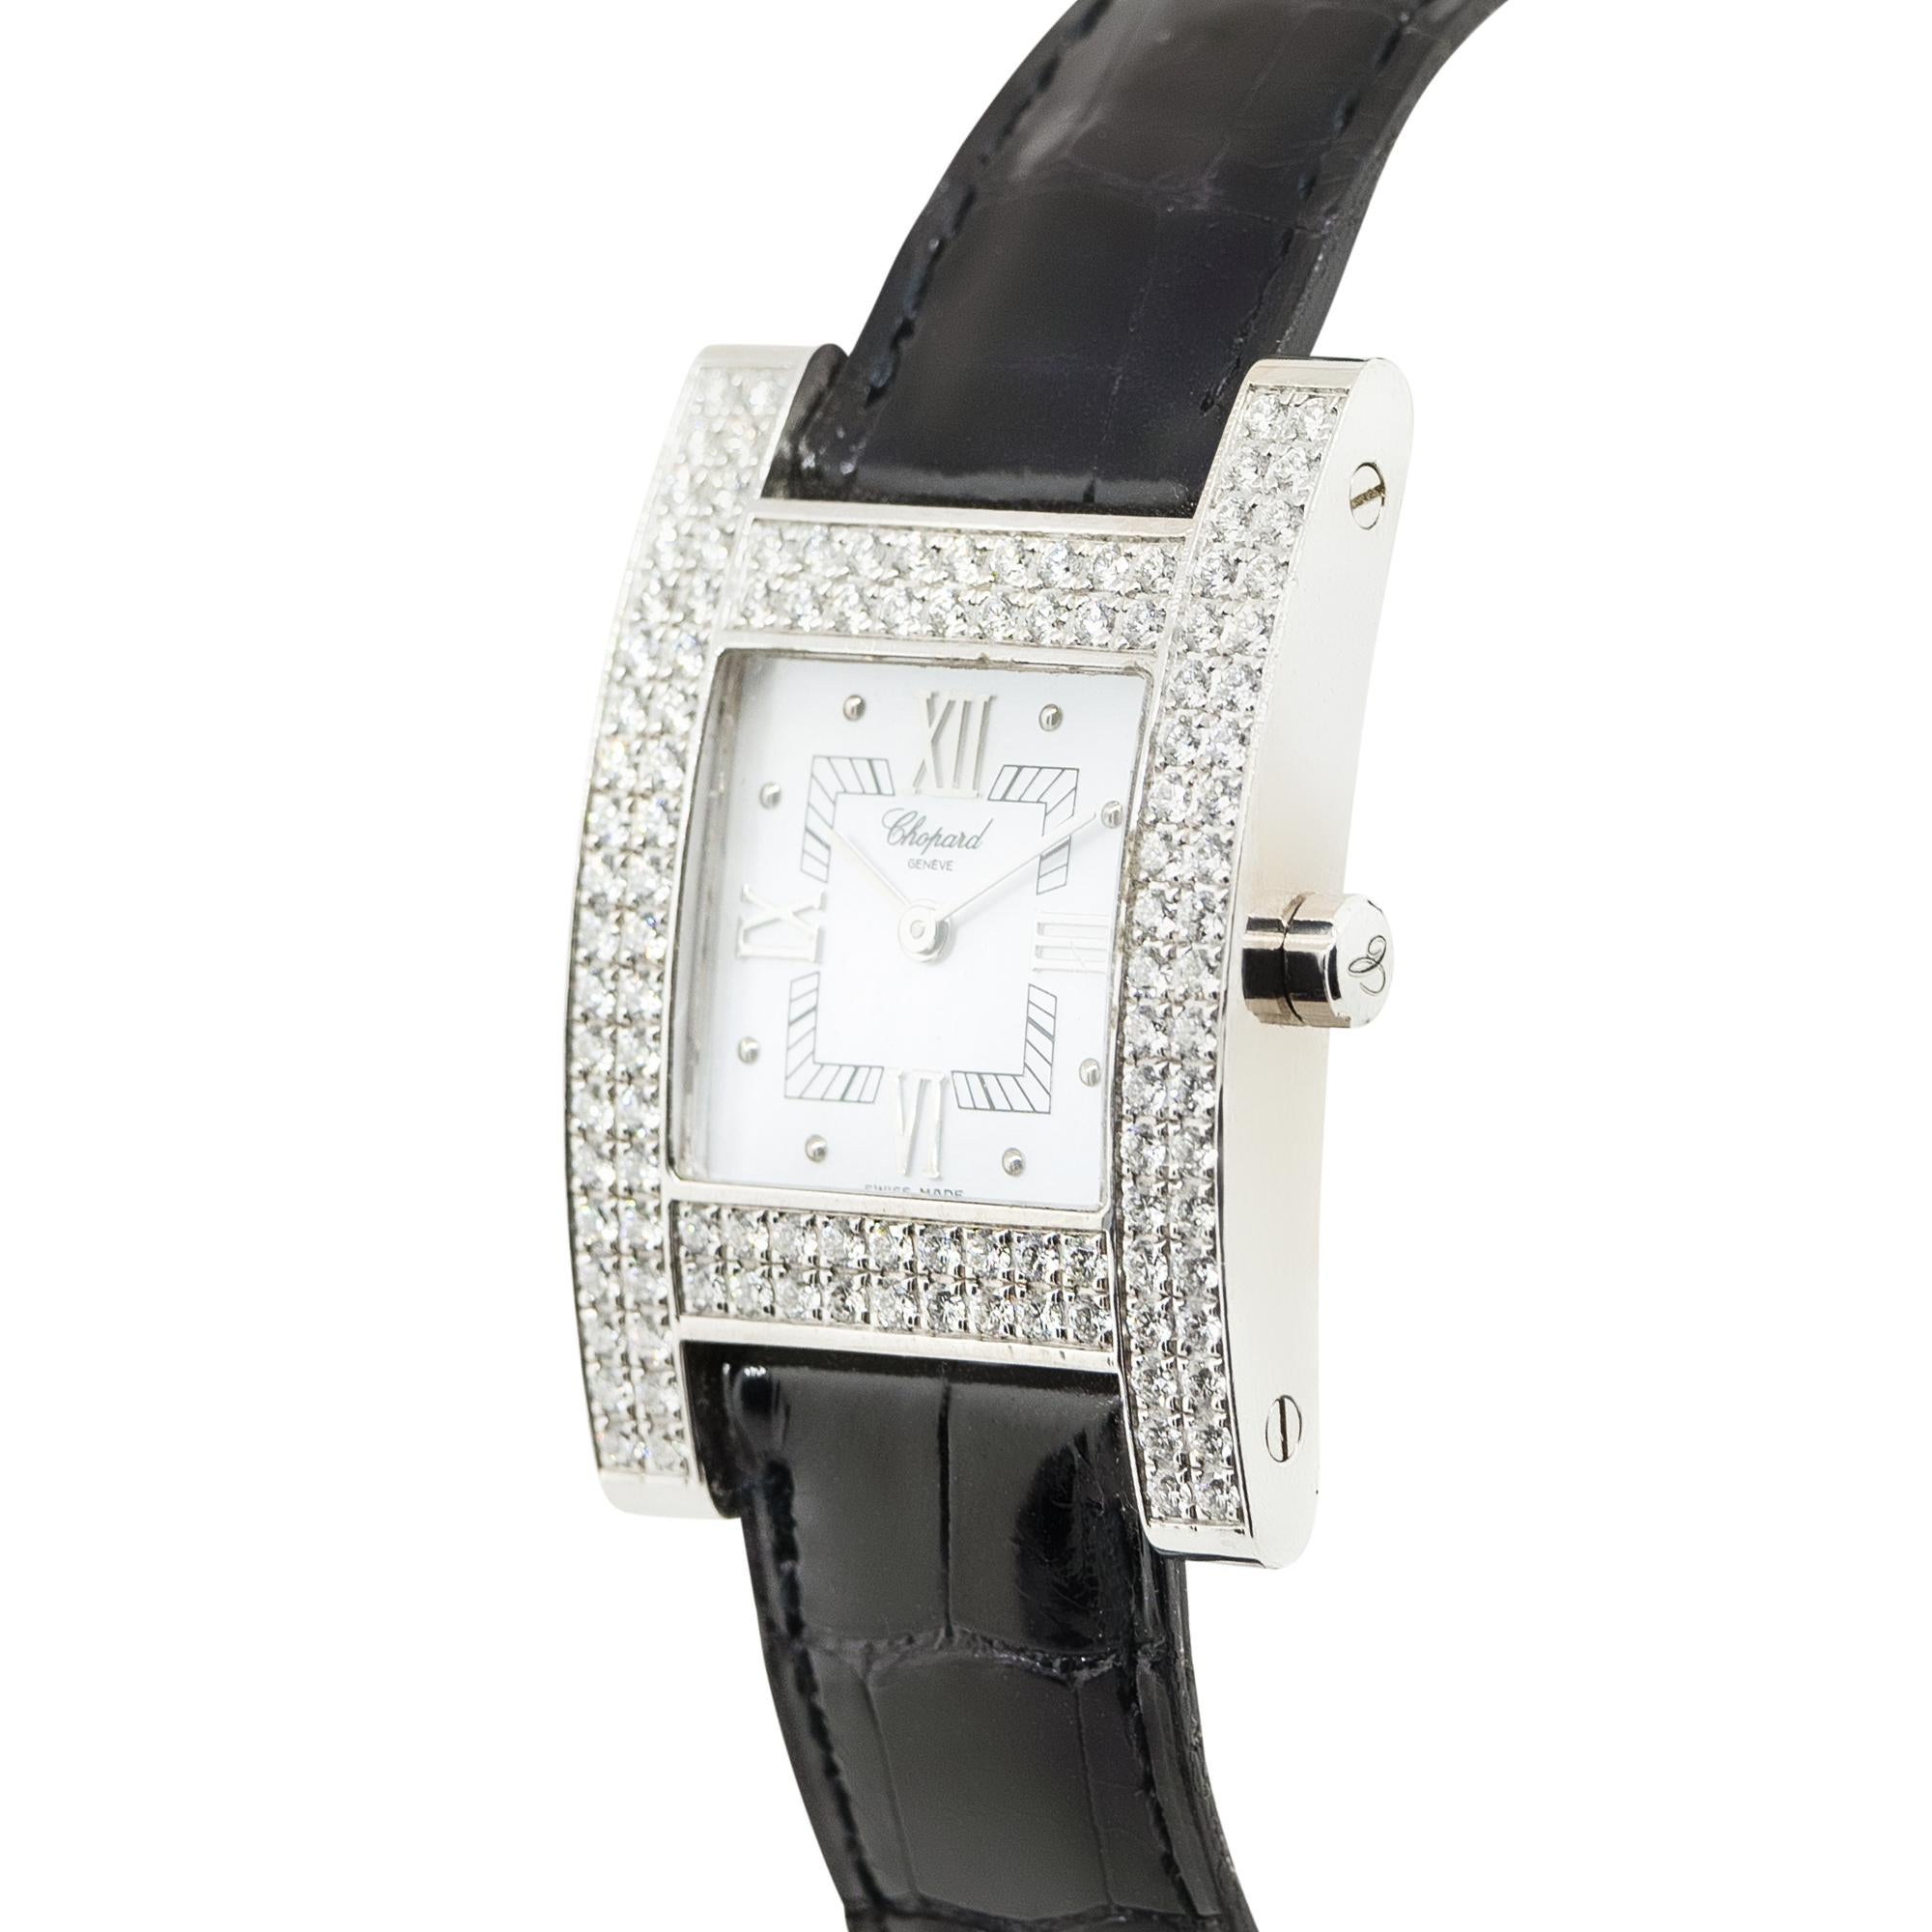 Brand: Chopard
Model: Your Hour
Case Material: 18k White Gold
Case Diameter: 24.5mm
Bezel: 18k White Gold with 2 Rows of Diamonds Bezel
Dial: White with Roman Numerals Dial
Bracelet: Black Leather
Size: 6